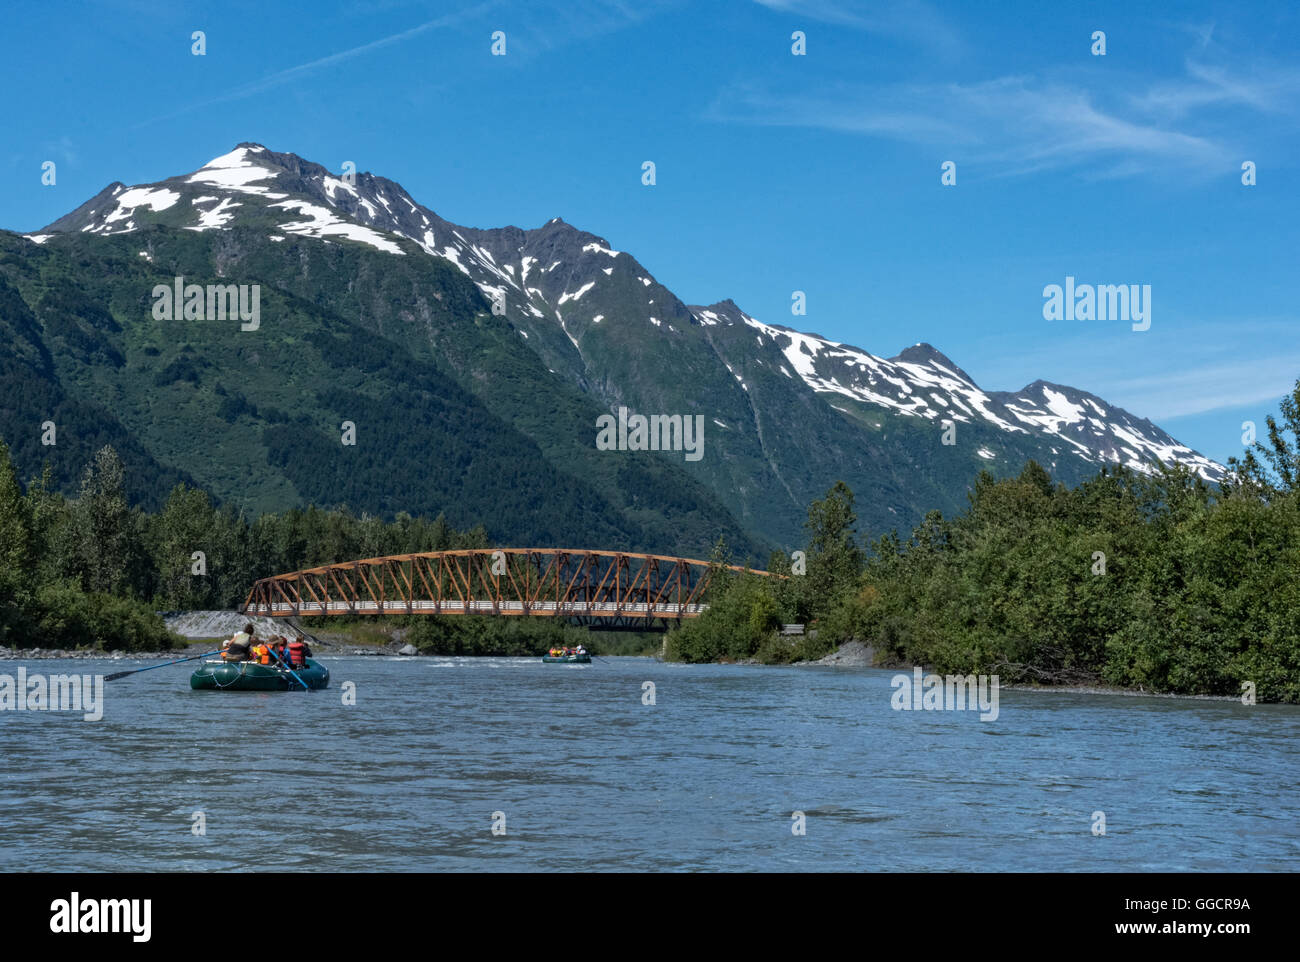 Several rafts are floating under a bridge on the Placer River in South Central Alaska. Stock Photo